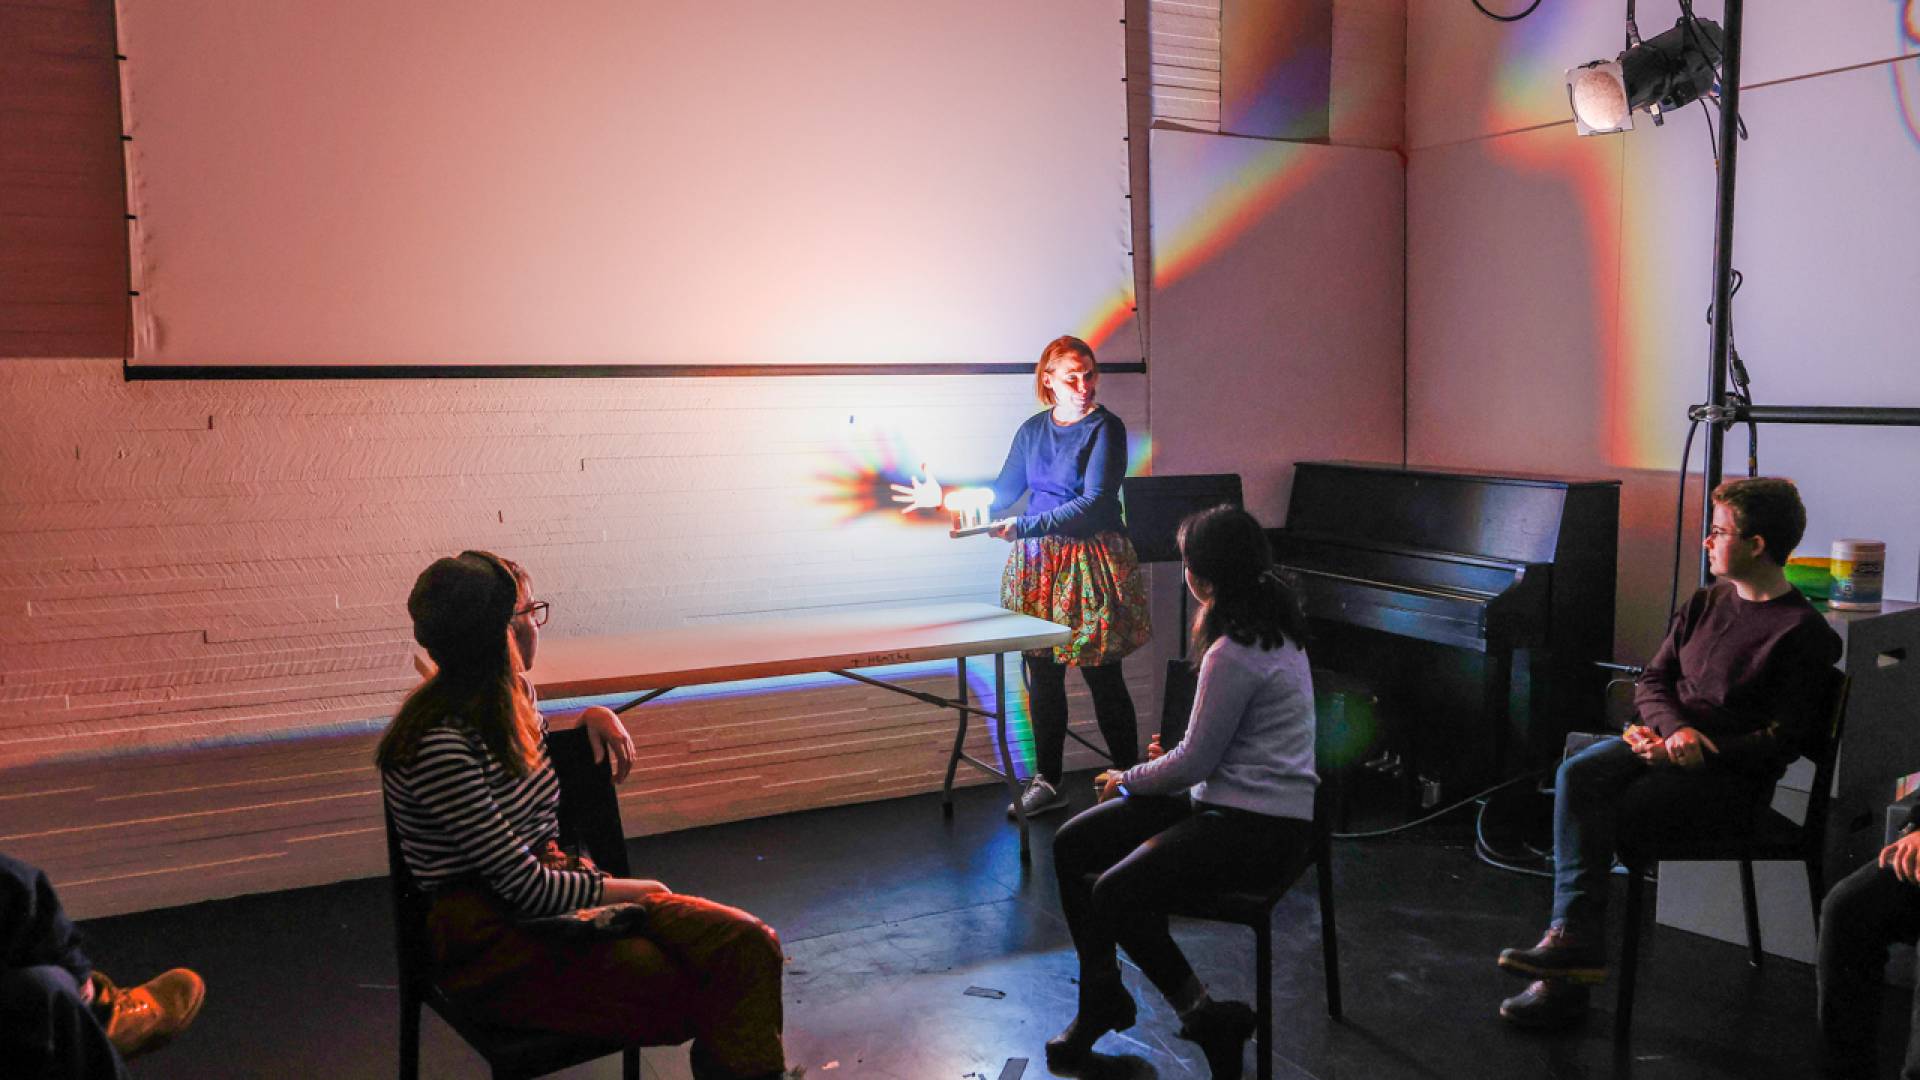 Lighting designer Tess James, a lecturer in theater and the Lewis Center for the Arts, leads the Wintersession workshop "Color and Light." The hands-on class explored how color and light shape our perspectives on the world.